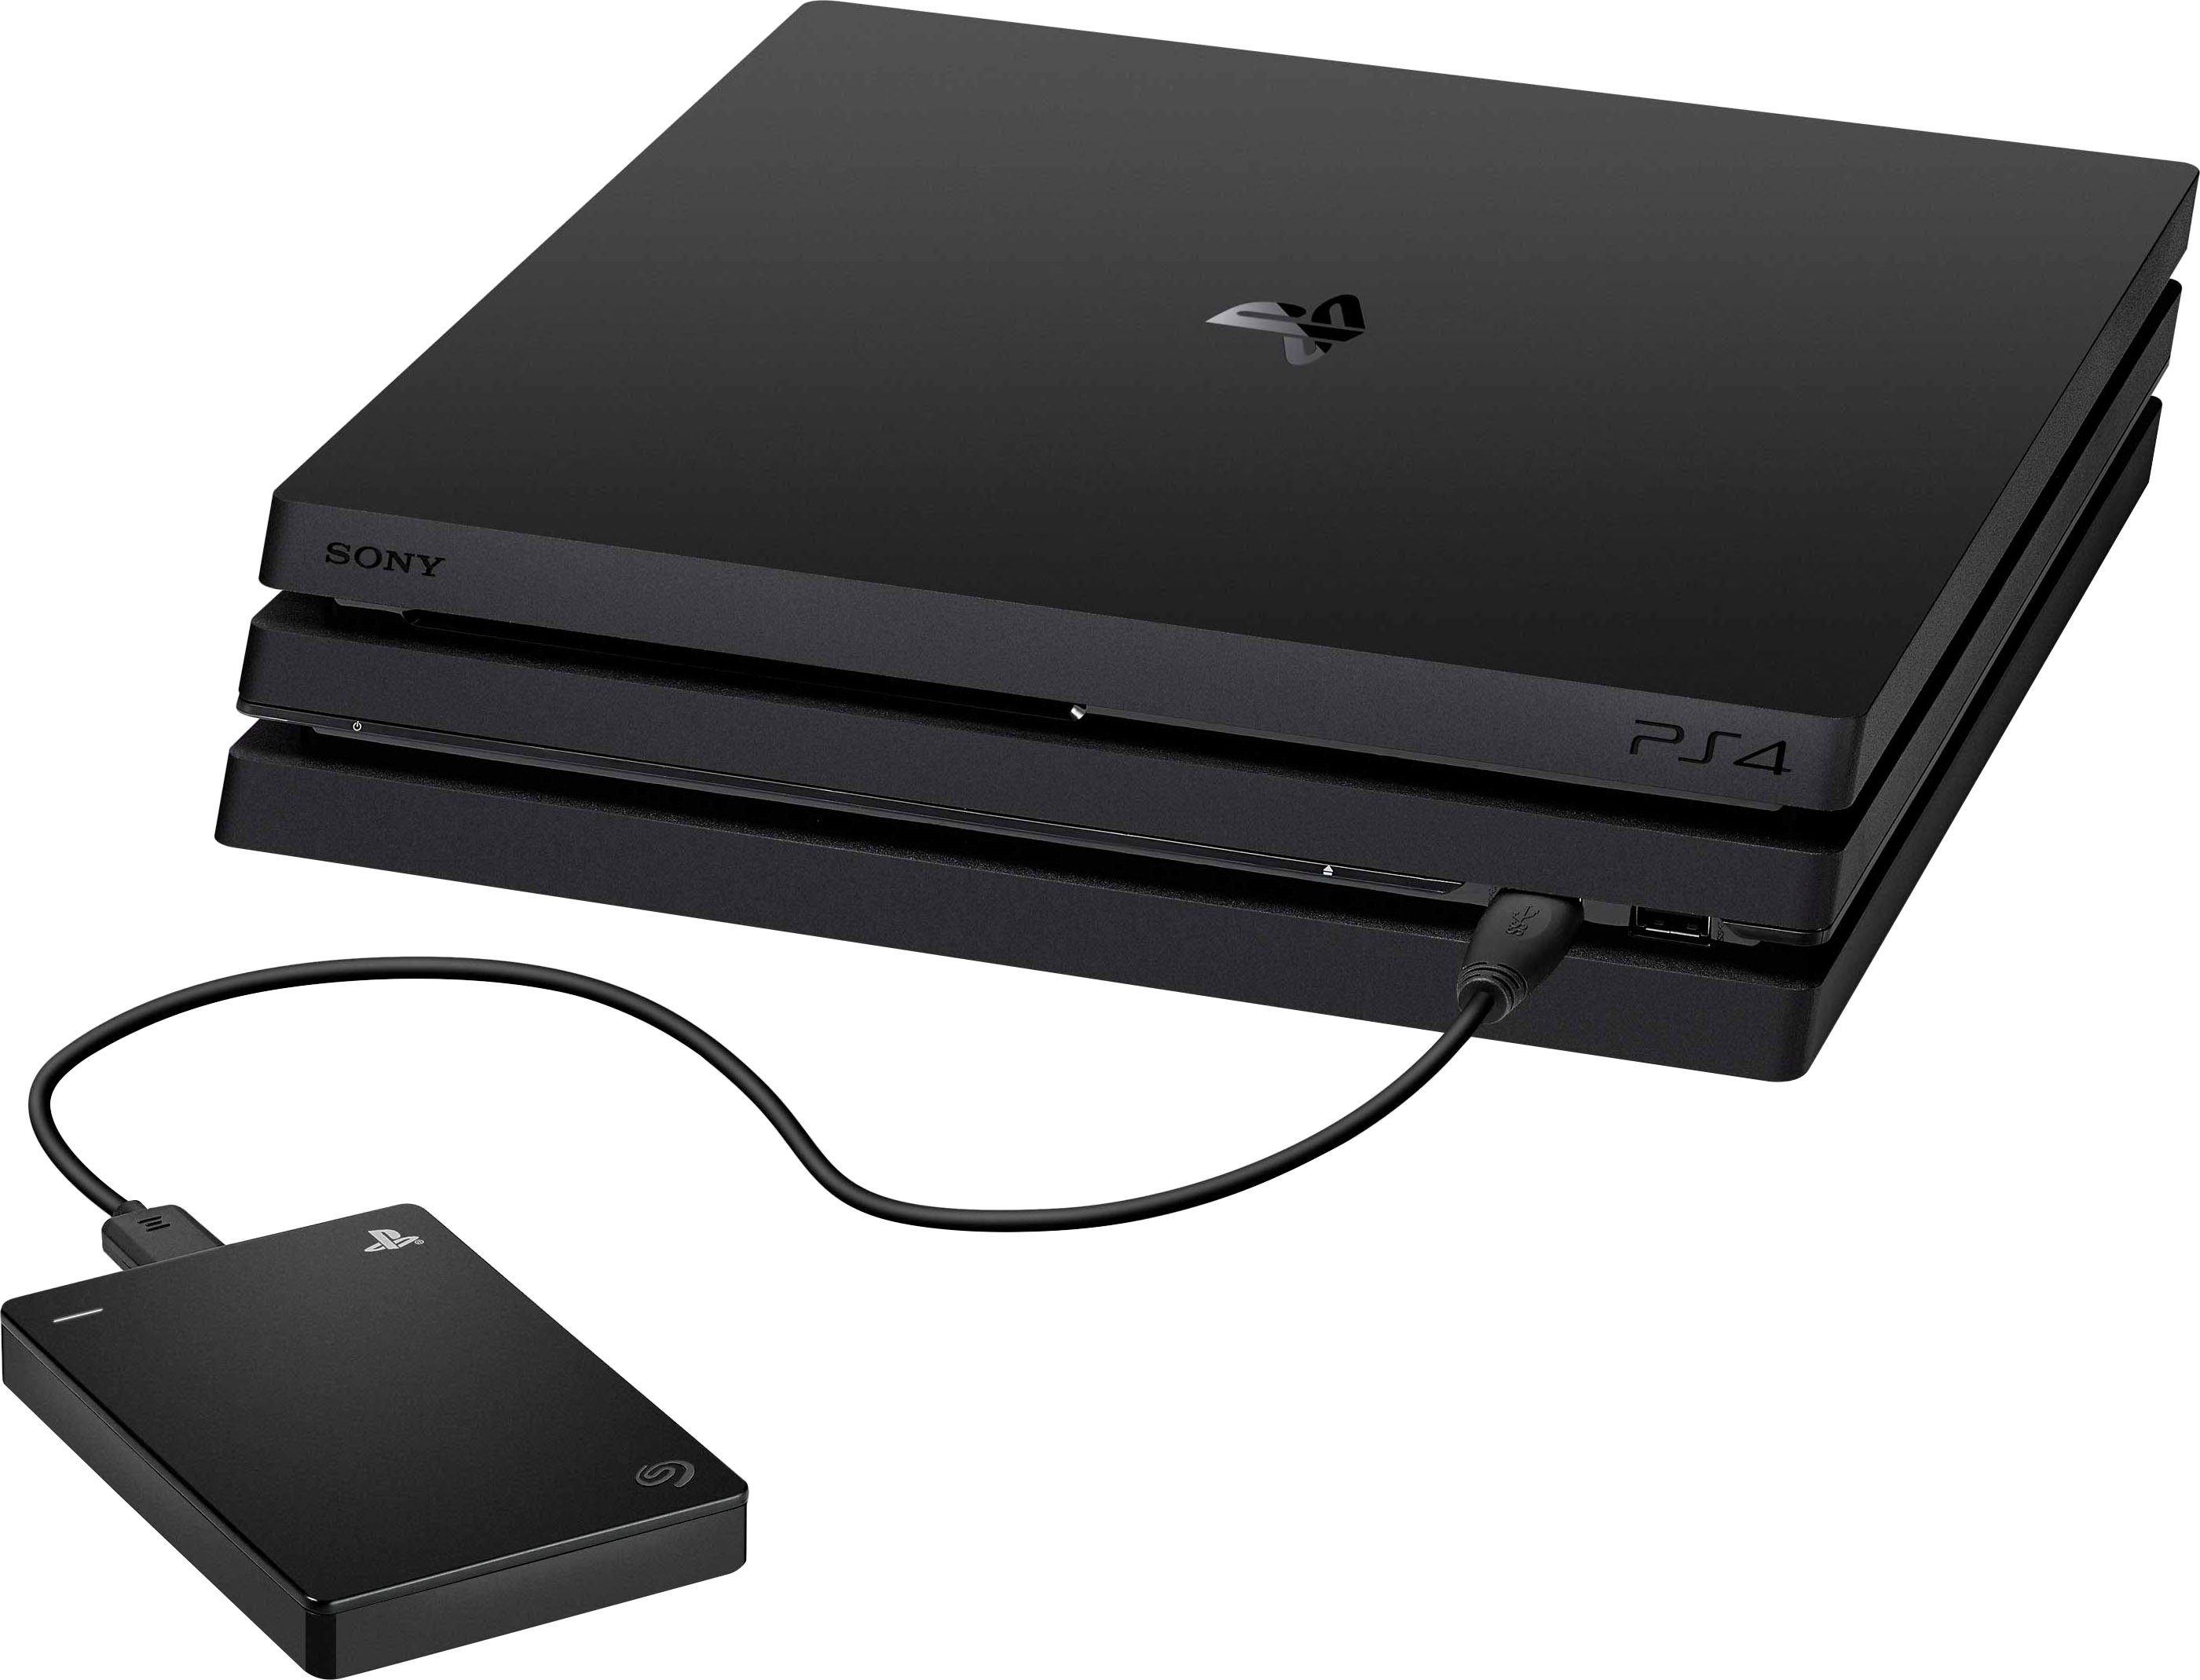 / 5.0 PS4/PS5 Seagate Mbps 3.0) (USB Gbps externe MB/S HDD-Festplatte TB) Game 4TB für (USB 2.0) 480 Drive (4 Lesegeschwindigkeit